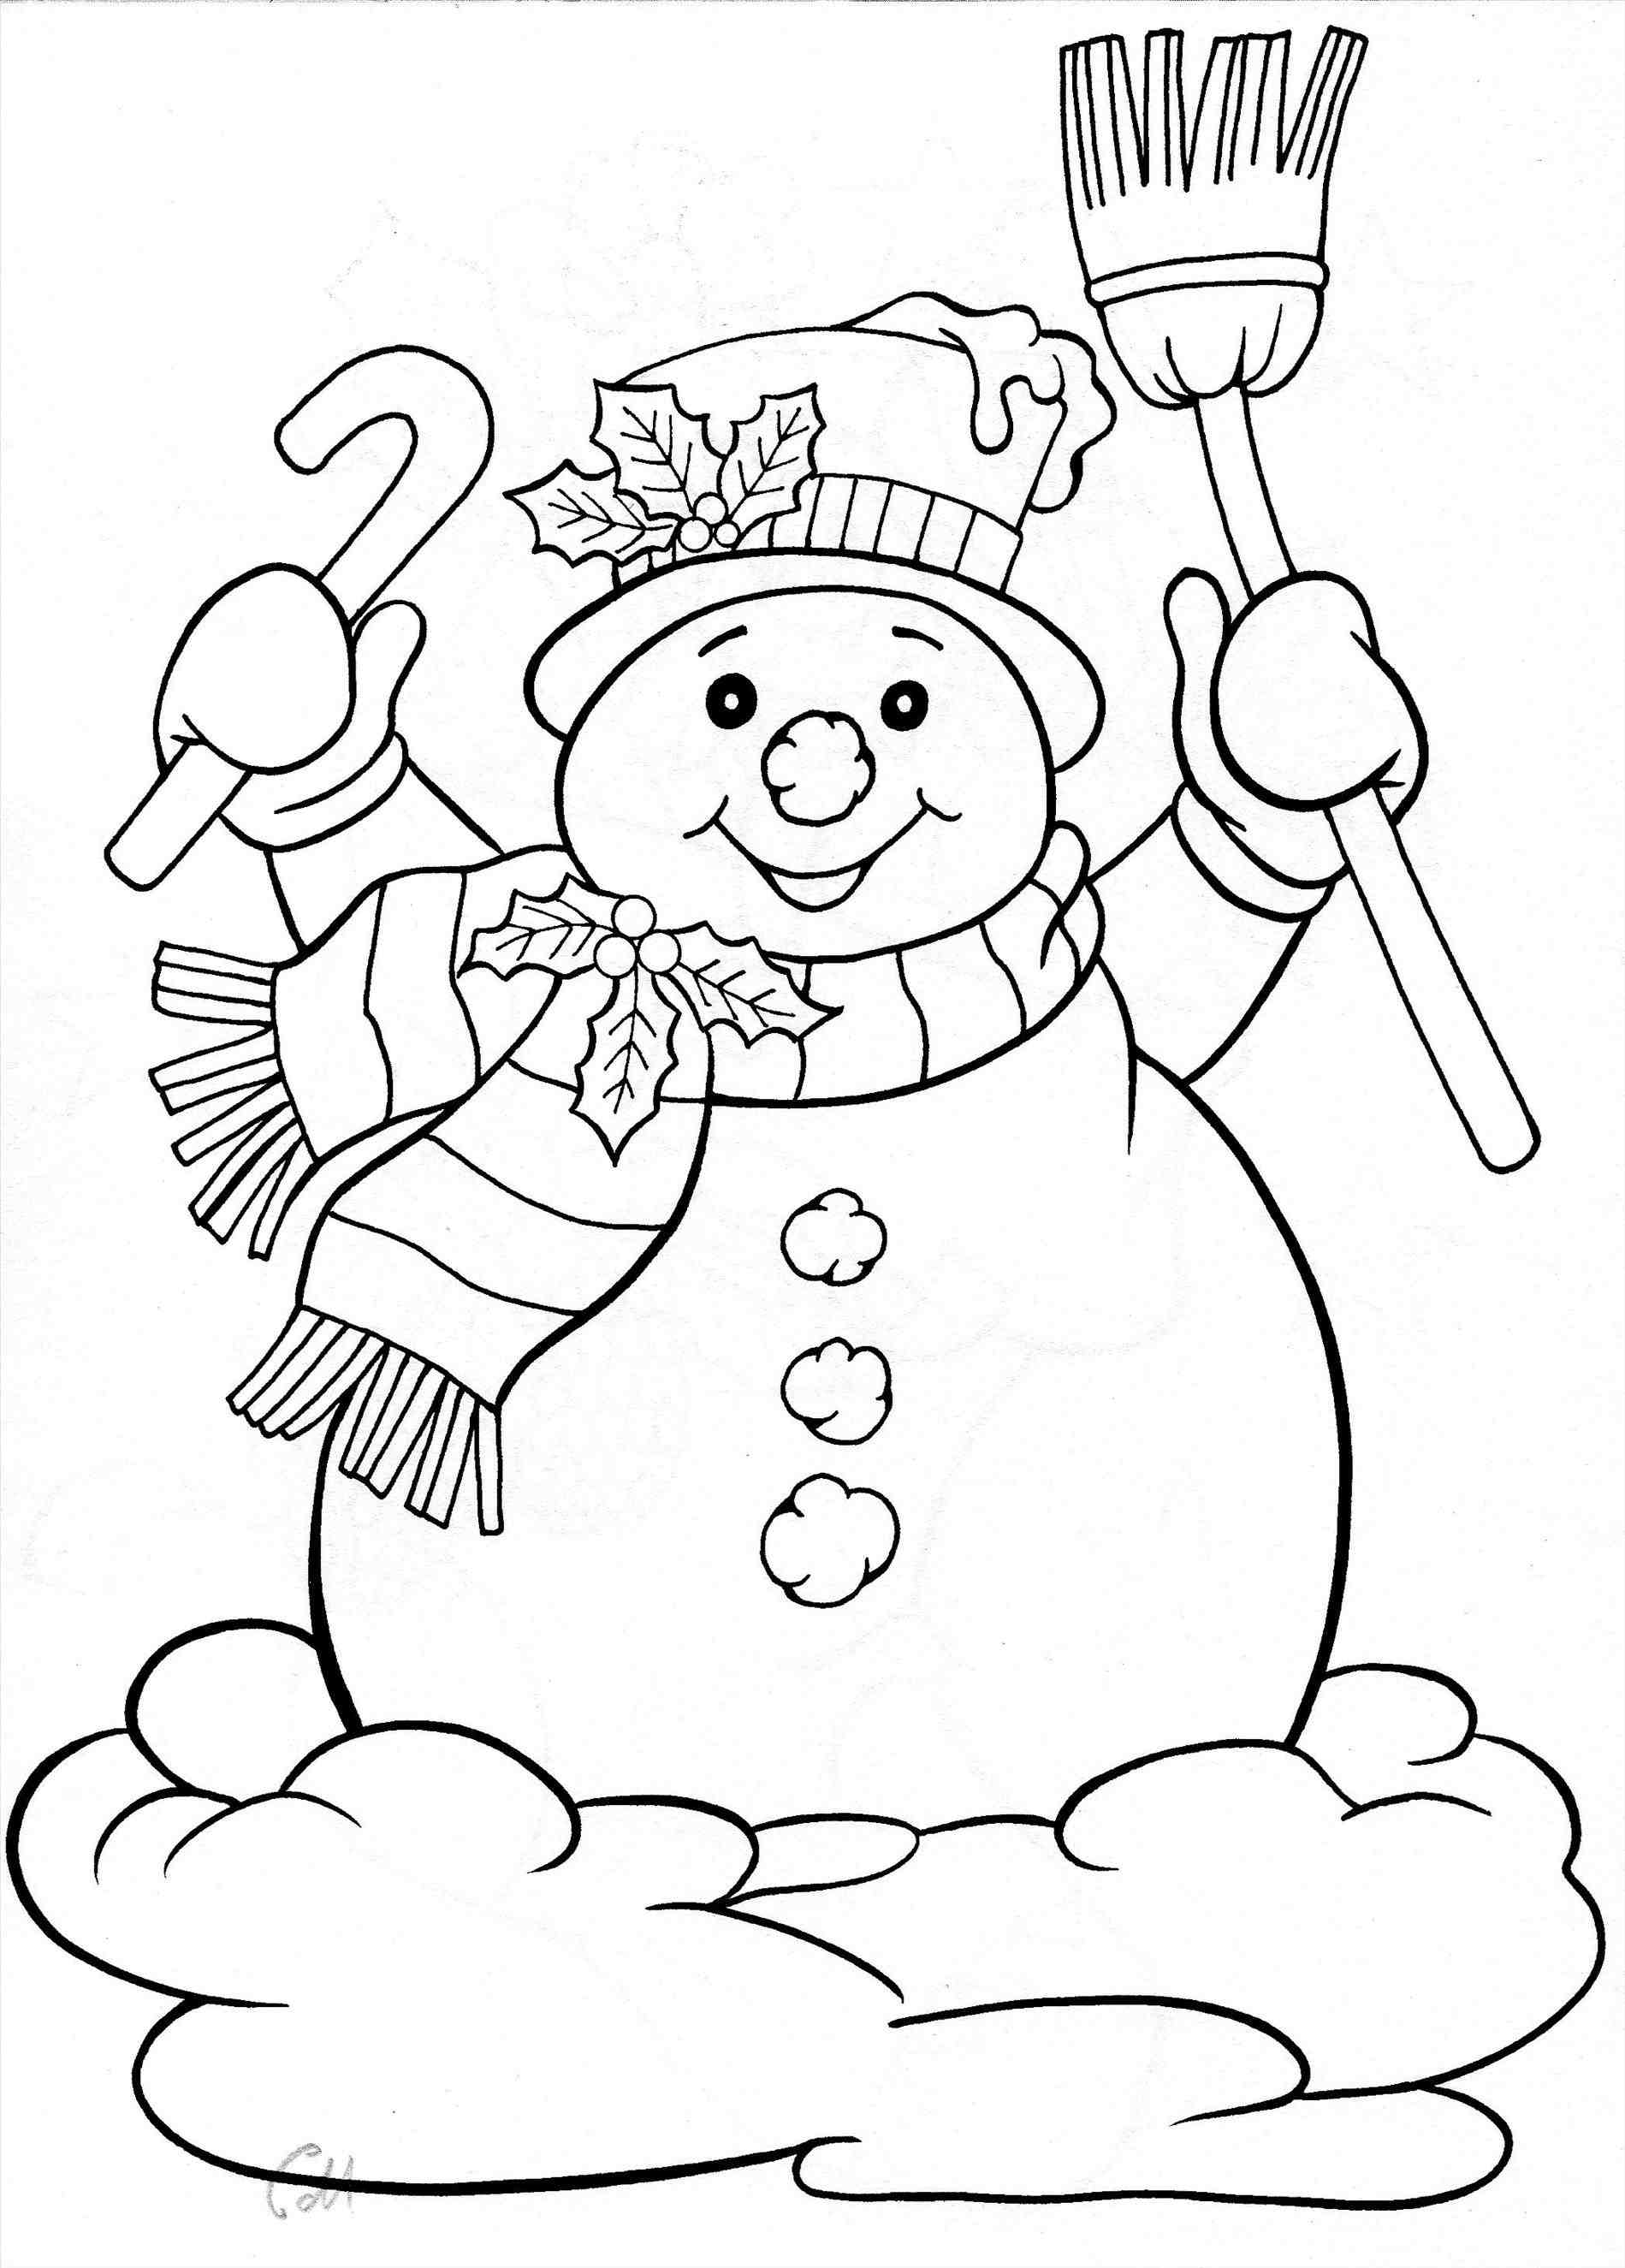 Cute Snowman Coloring Pages at GetColorings.com | Free printable